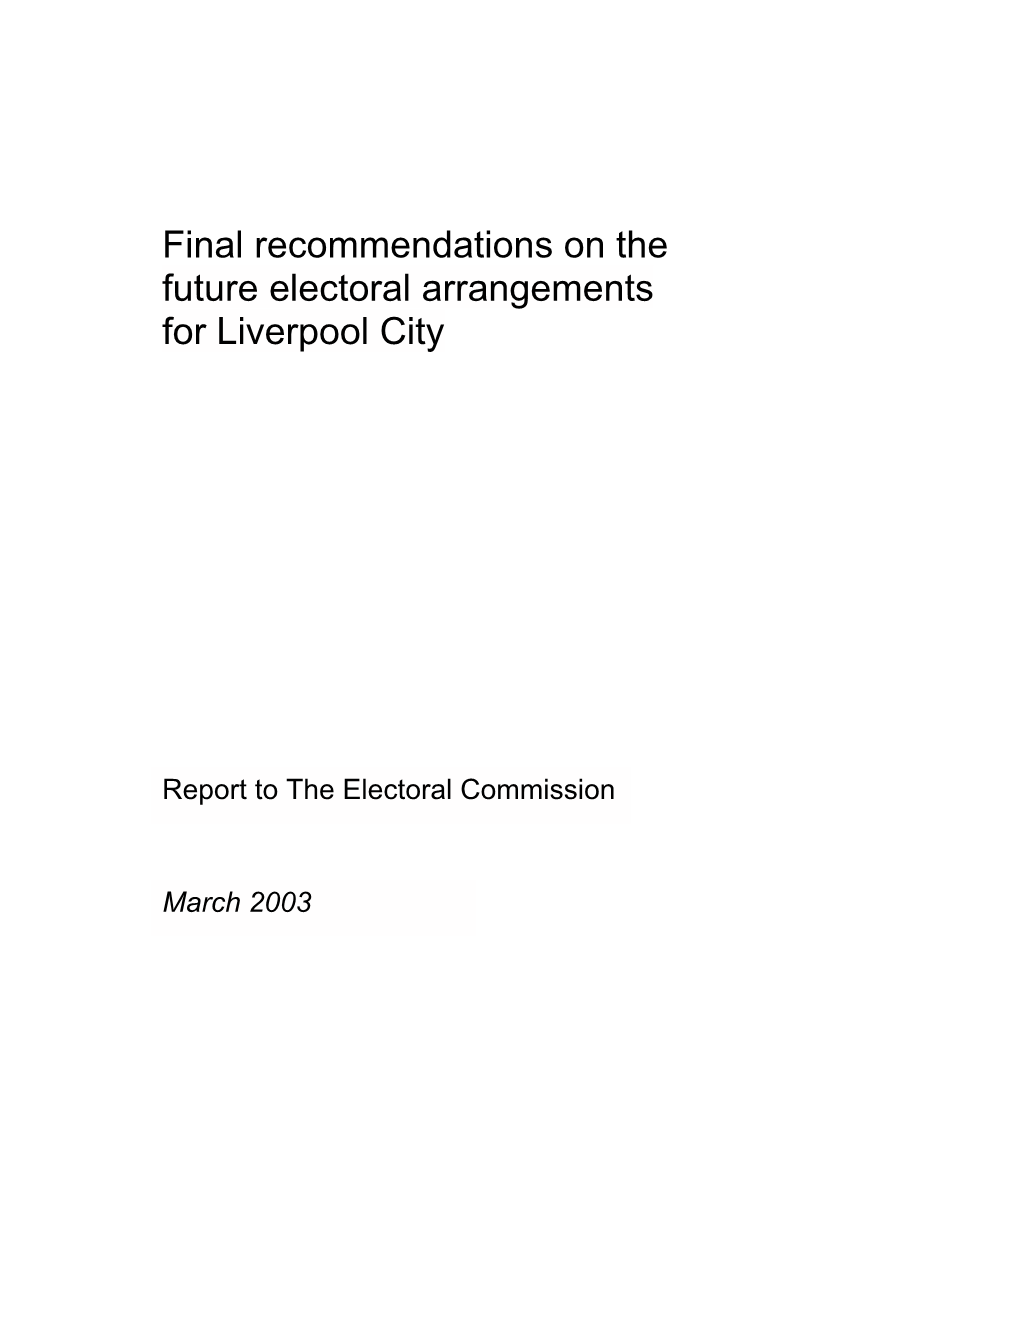 Final Recommendations on the Future Electoral Arrangements for Liverpool City